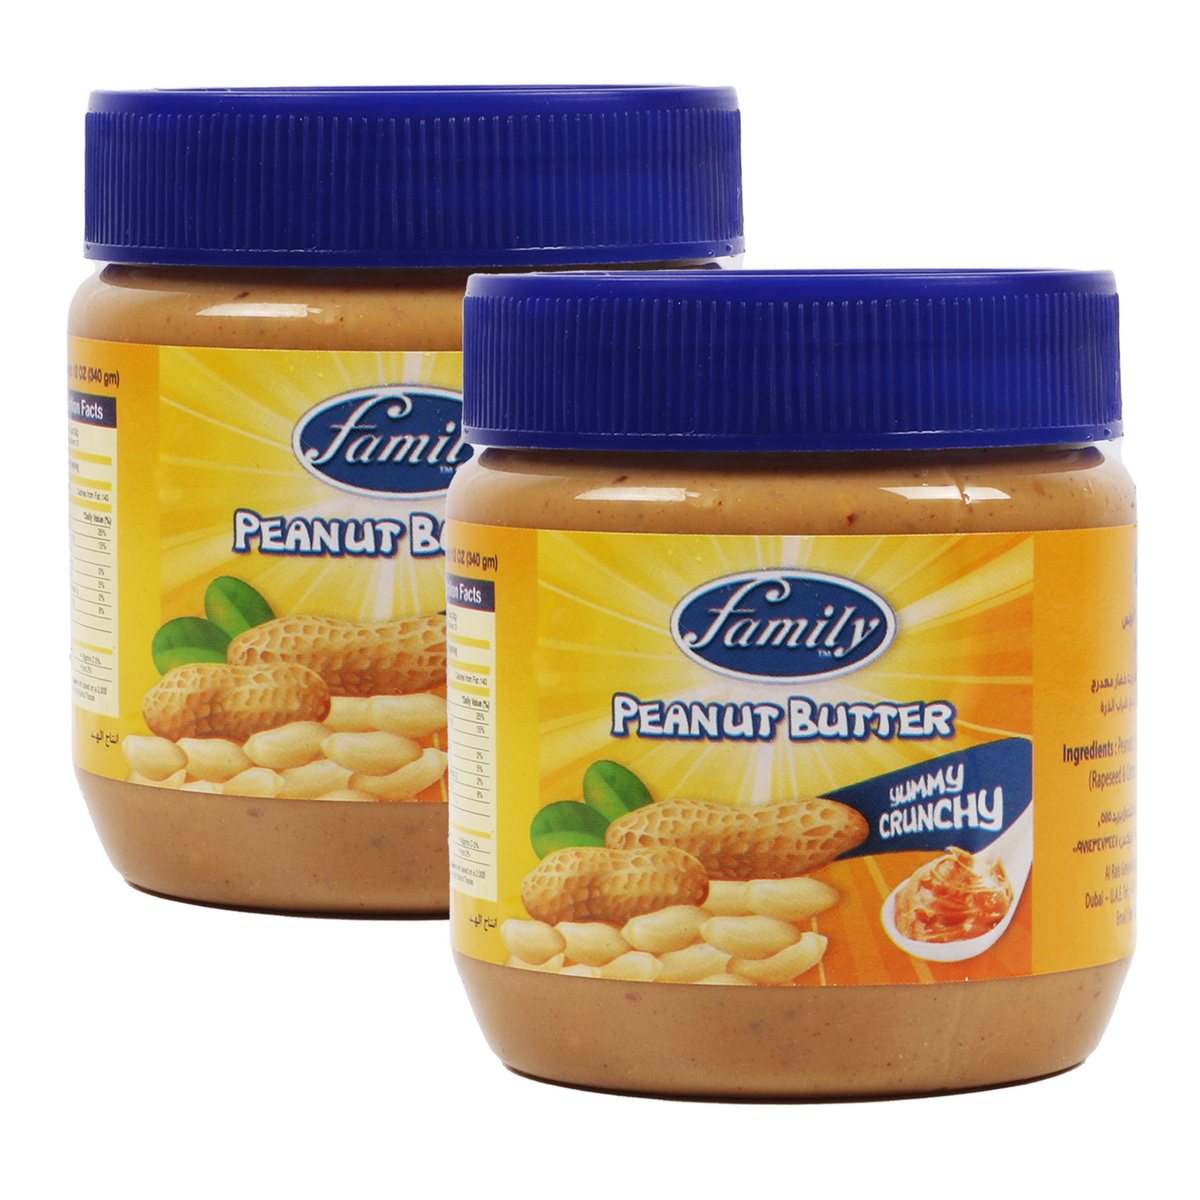 Family Crunchy Peanut Butter Value Pack 2 x 340 g